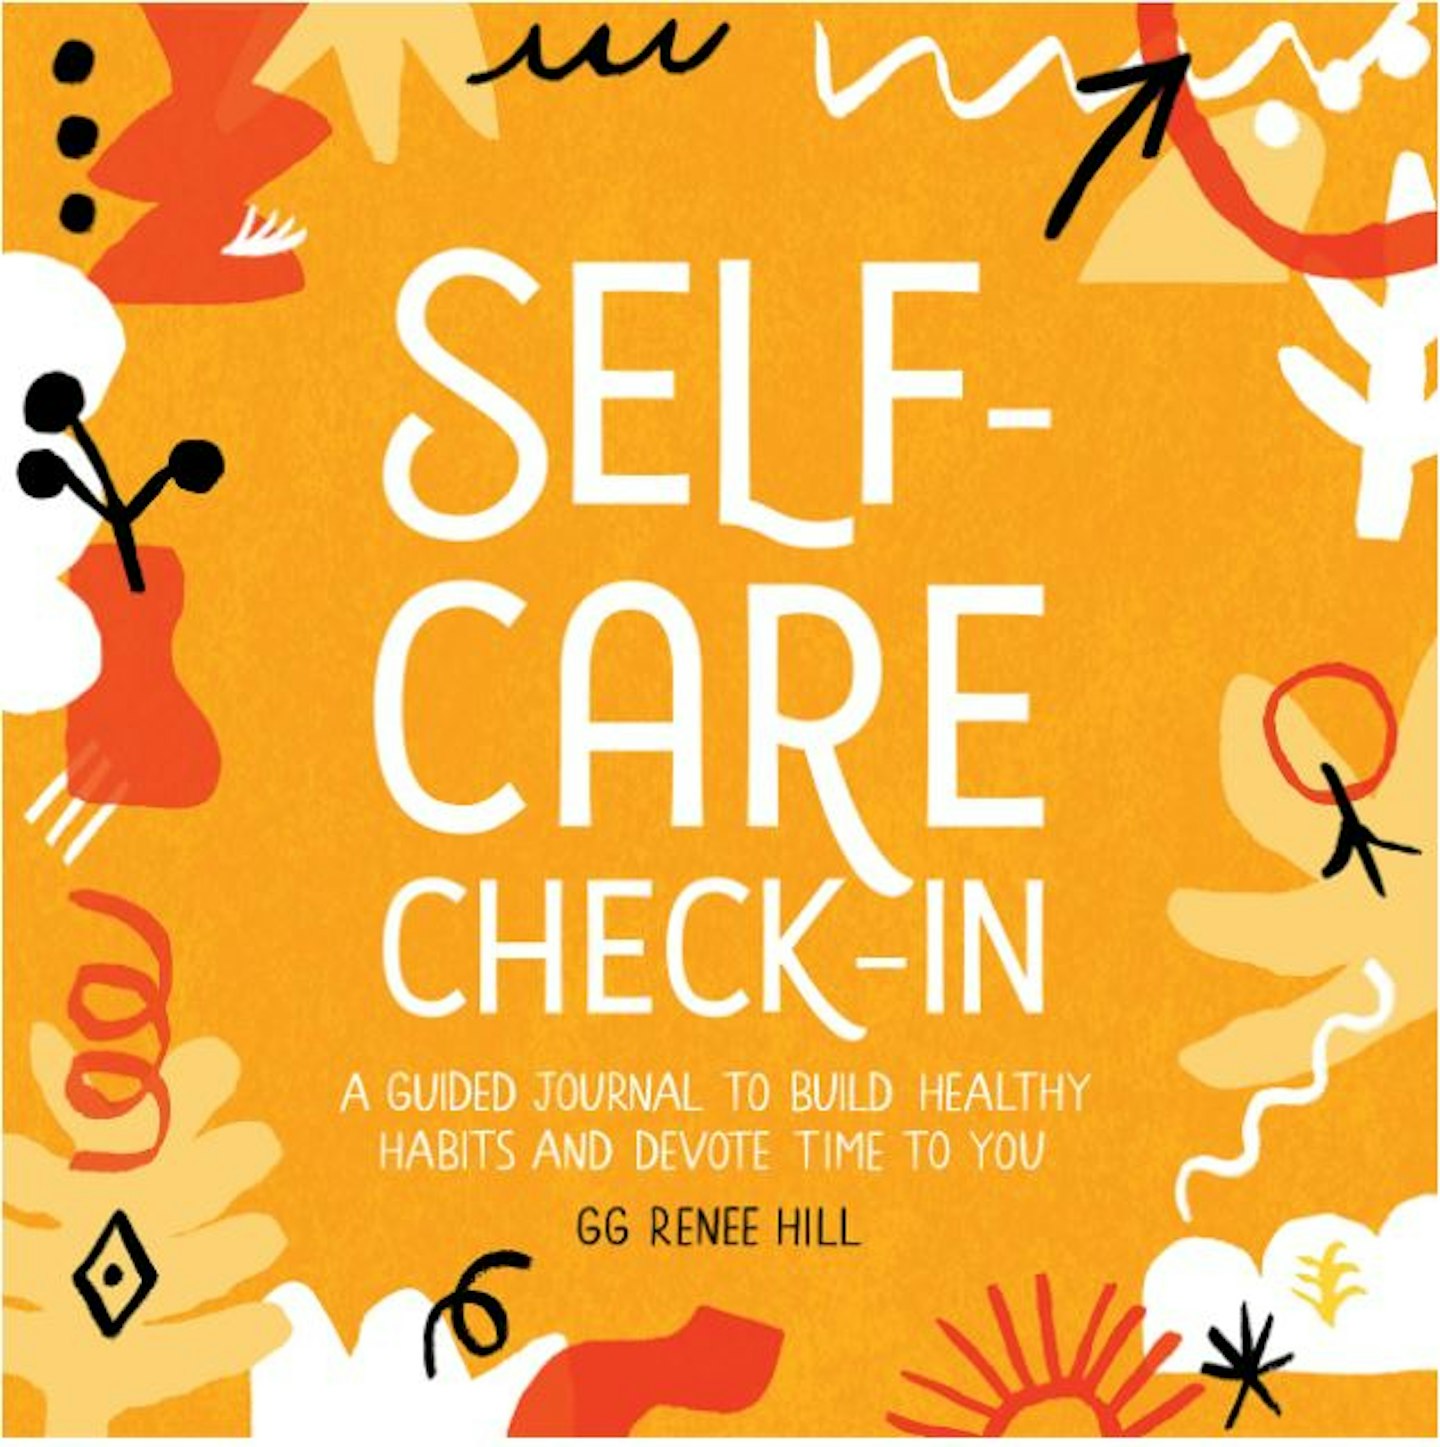 Self-Care Check-In: A Guided Journal from GG Renee Hill